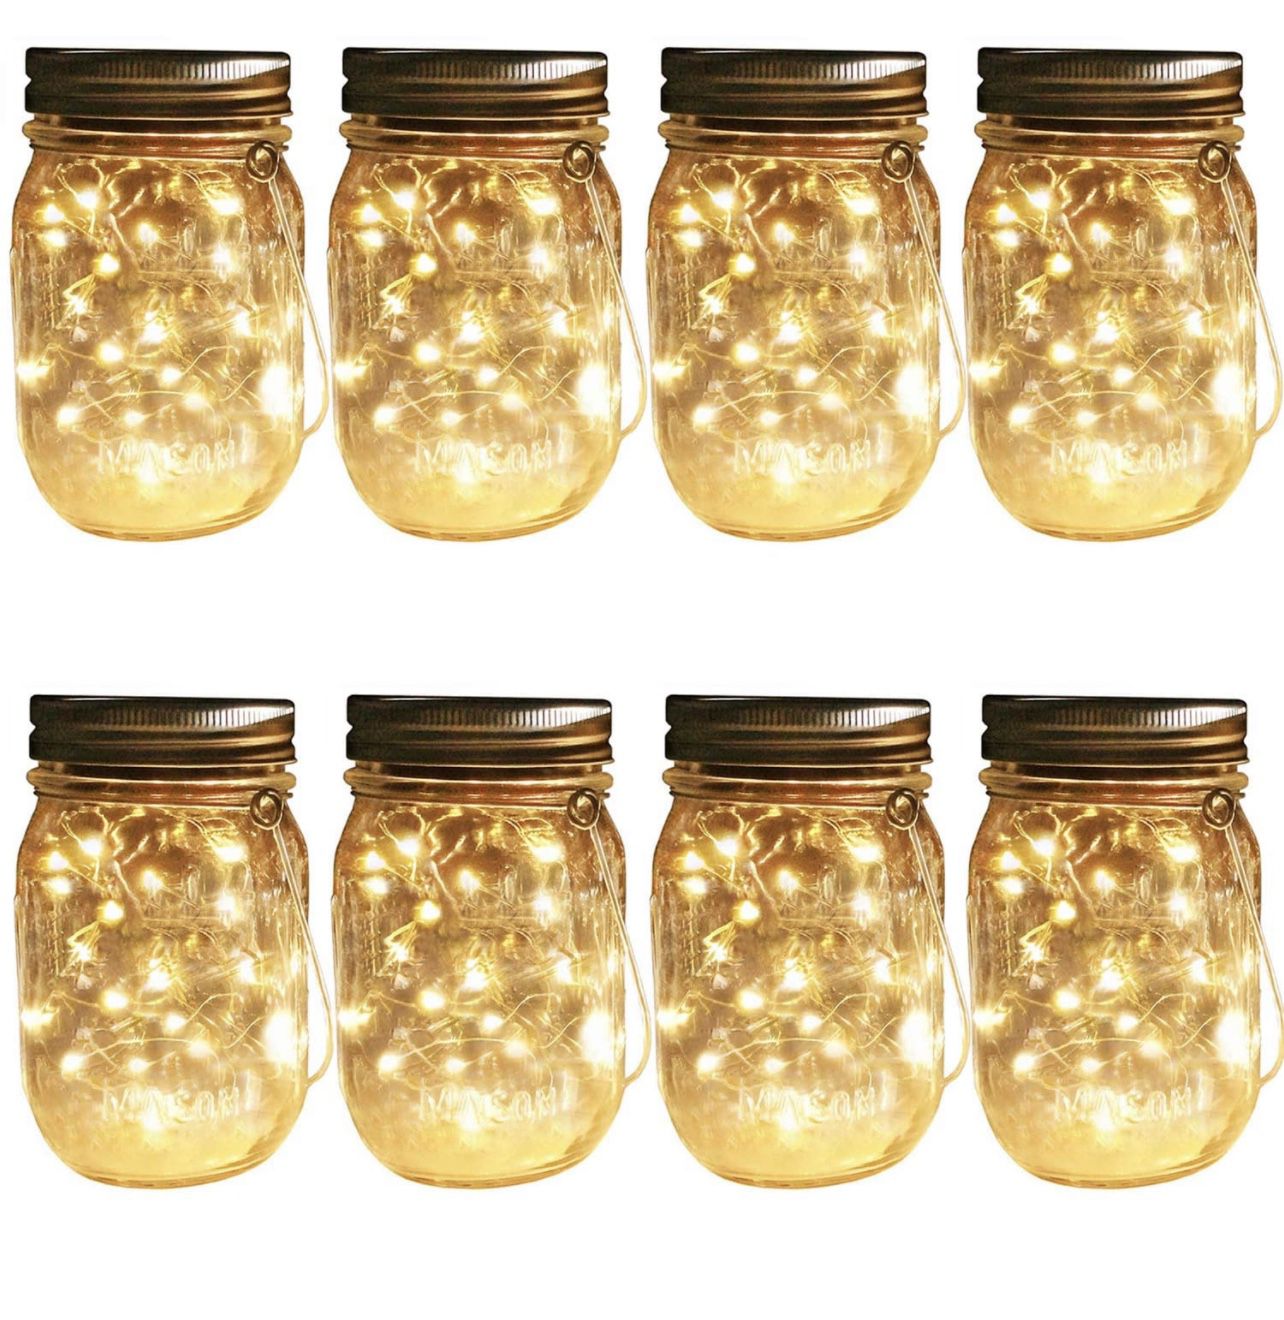 Brand New Solar Mason Jar Hanging Lights, 8 Pack 30 LEDs(Jar & Hangers Included) String Fairy Lights Glass Solar Laterns Table Lights,Great Outdoor La